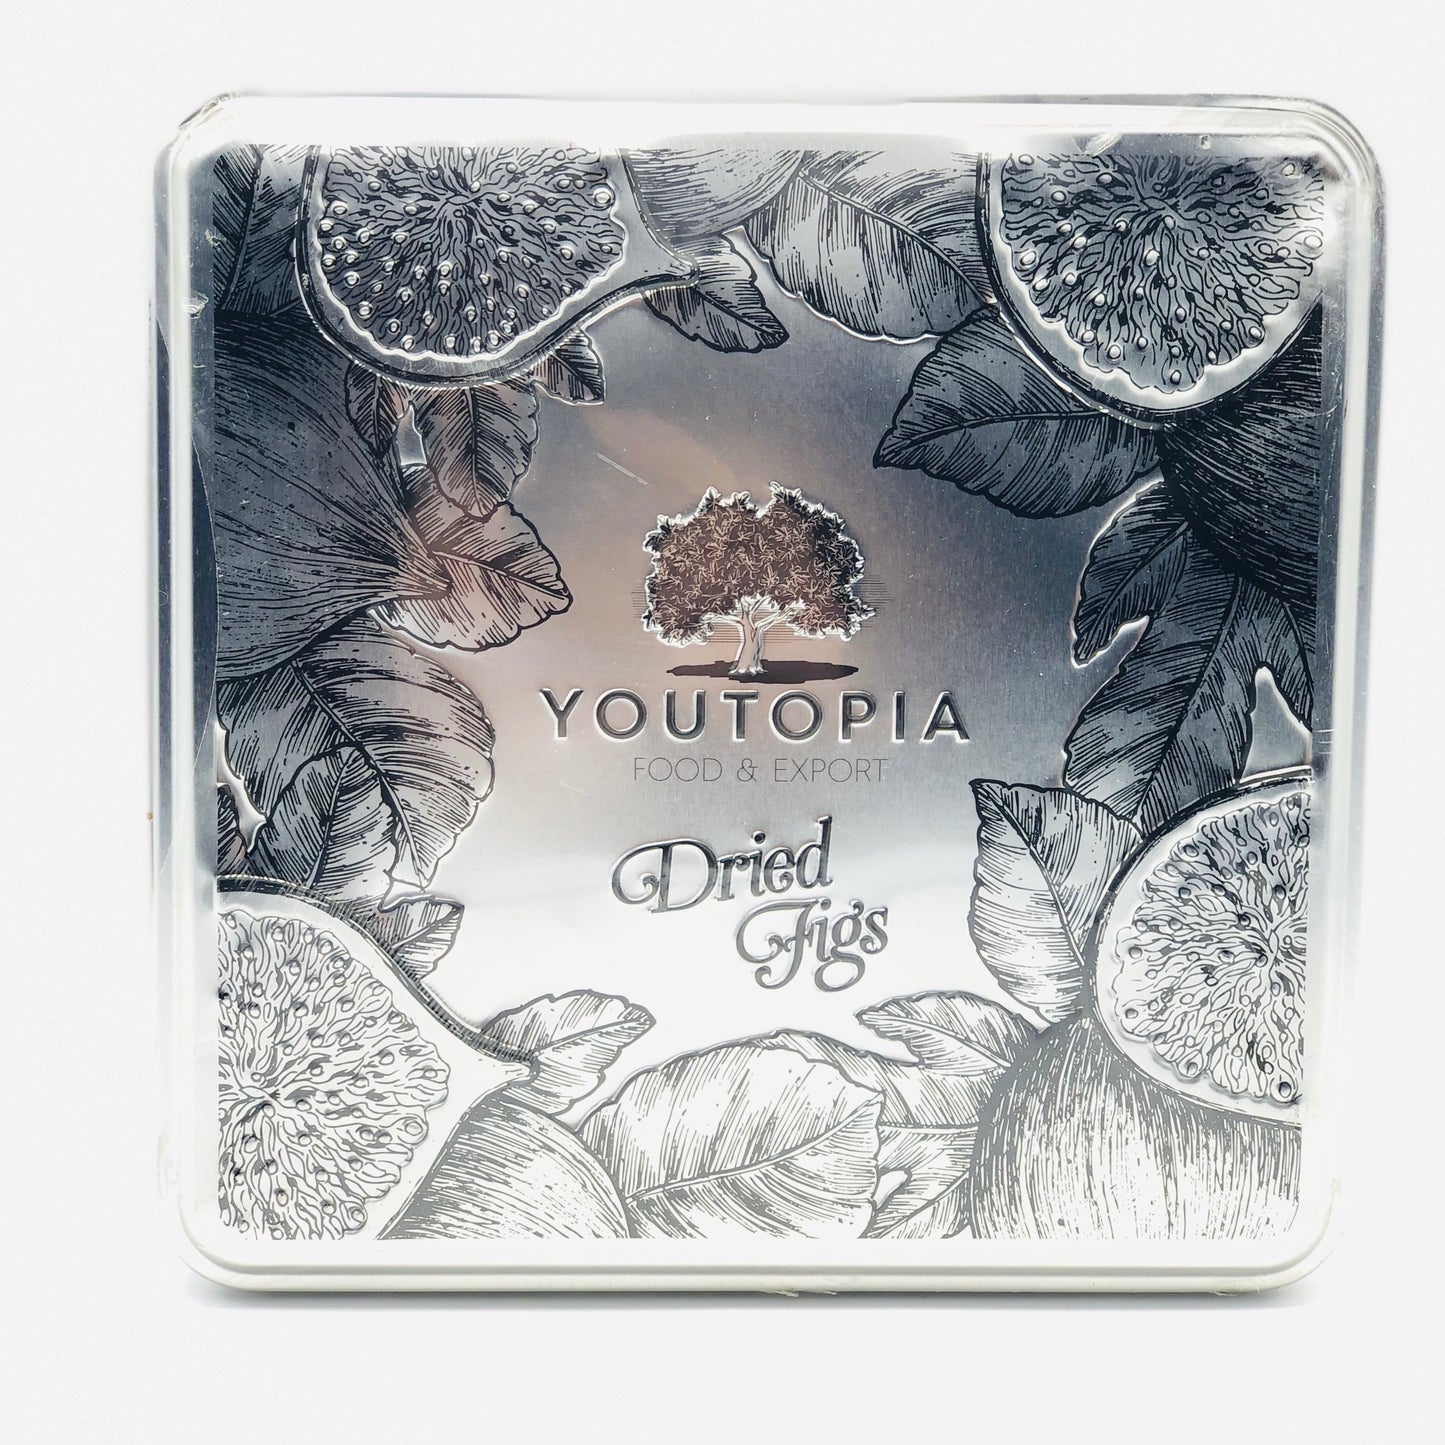 Youtopia, Export Quality Dried Figs